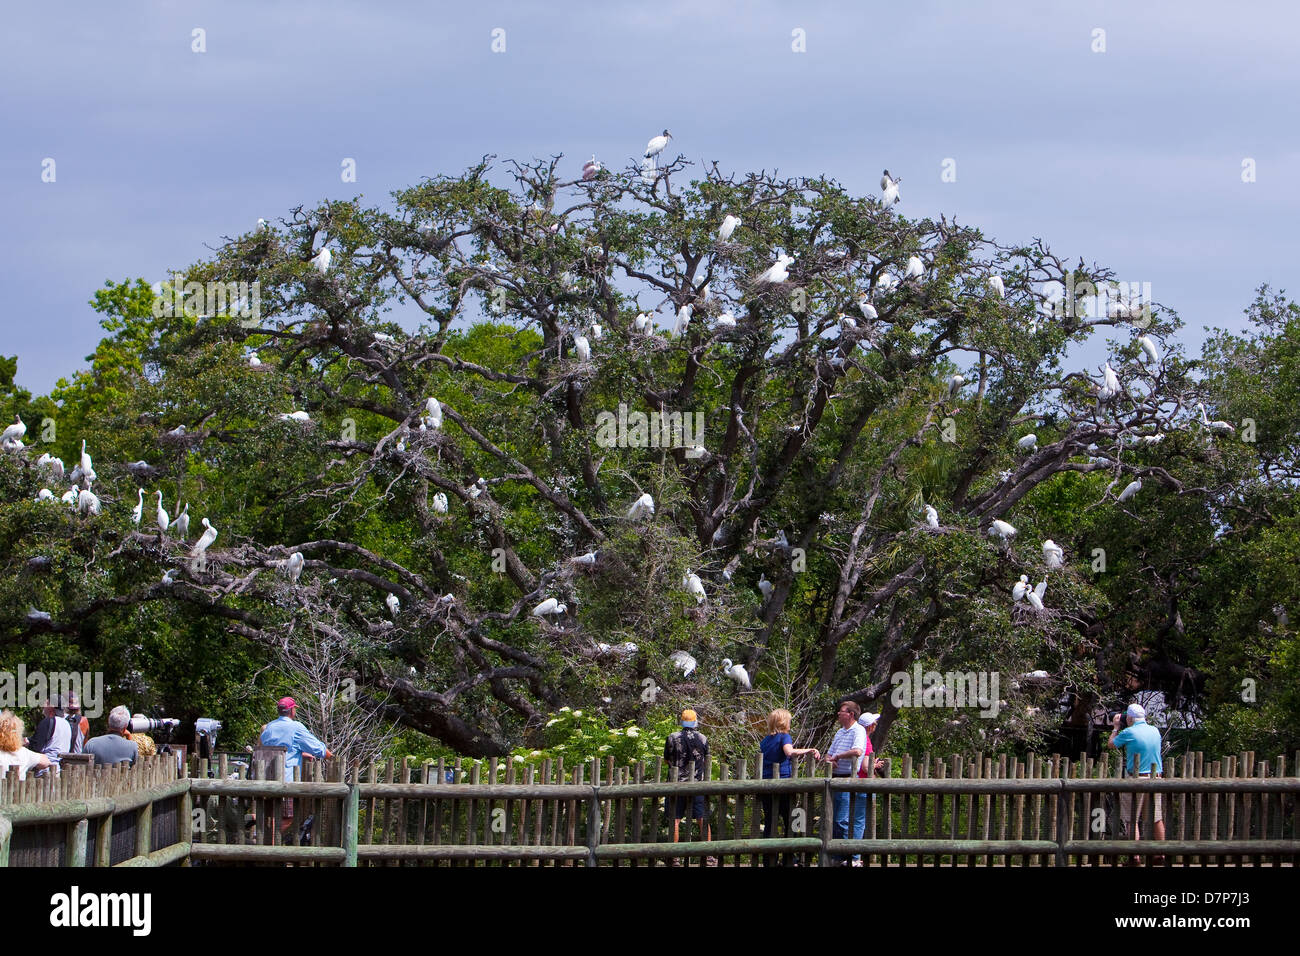 Dozens of birds are seen on a tree in the Alligator farm Zoological Park Bird rookery in St. Augustine, Florida Stock Photo